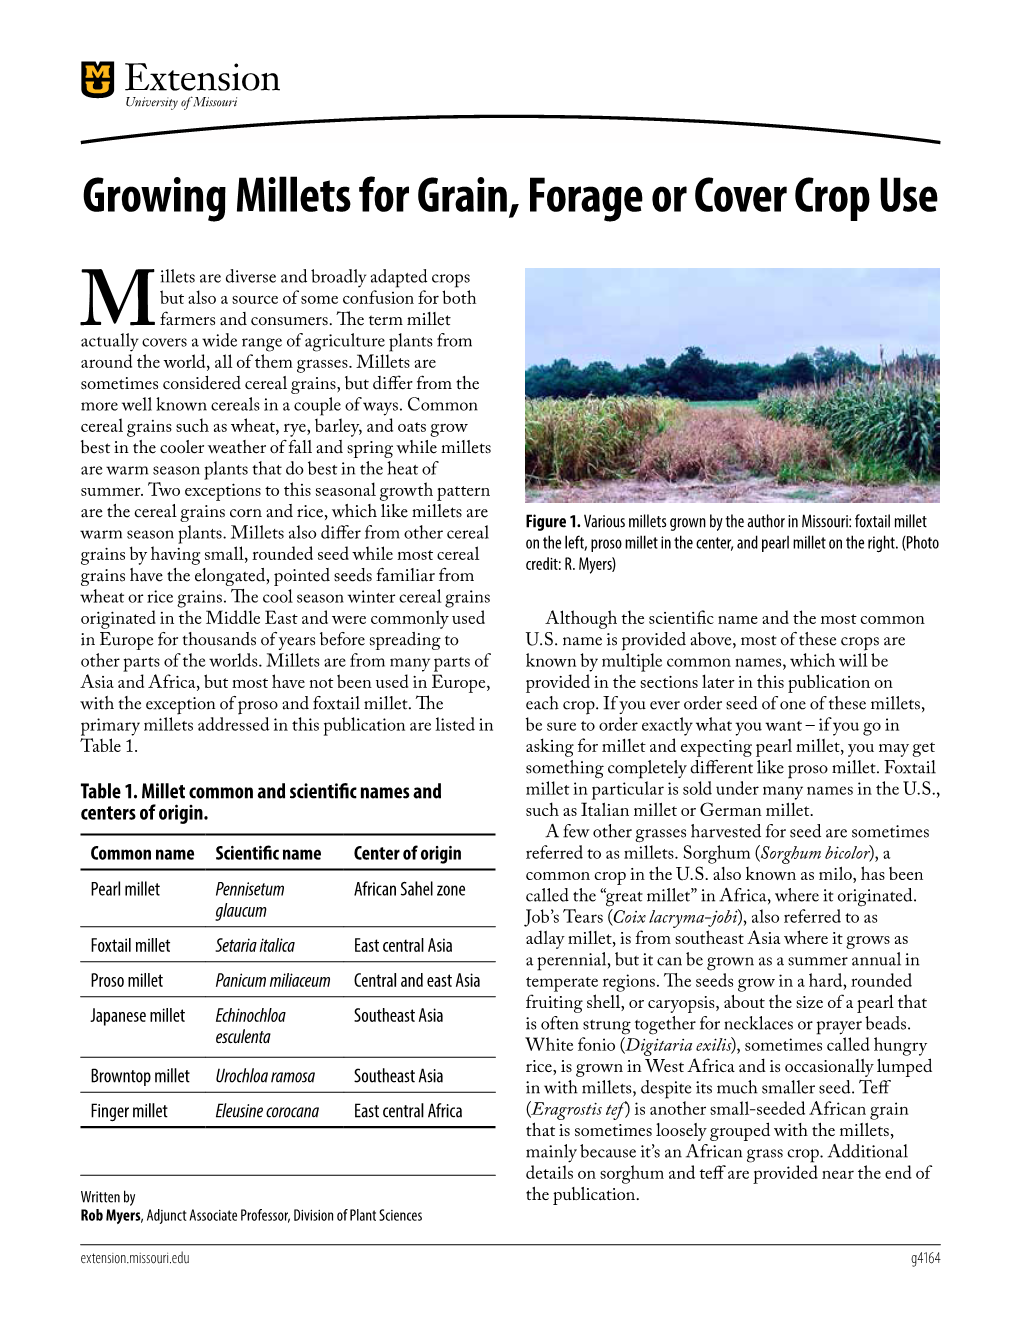 Growing Millets for Grain, Forage Or Cover Crop Use